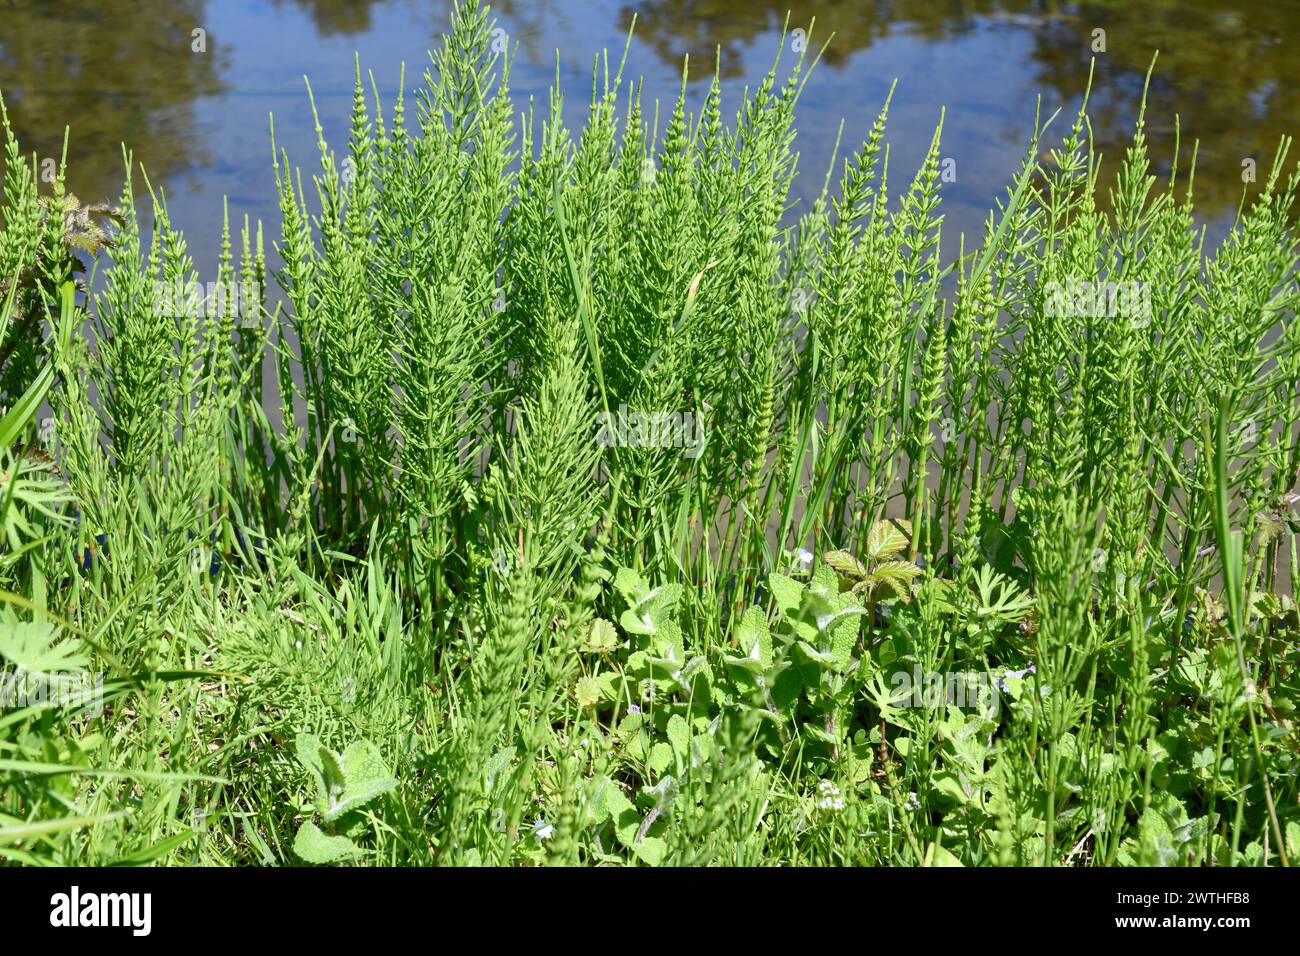 Horsetail (Equisetum arvense) is a cosmopolitan medicinal plant. This photo was taken in Aquitaine, France. Stock Photo